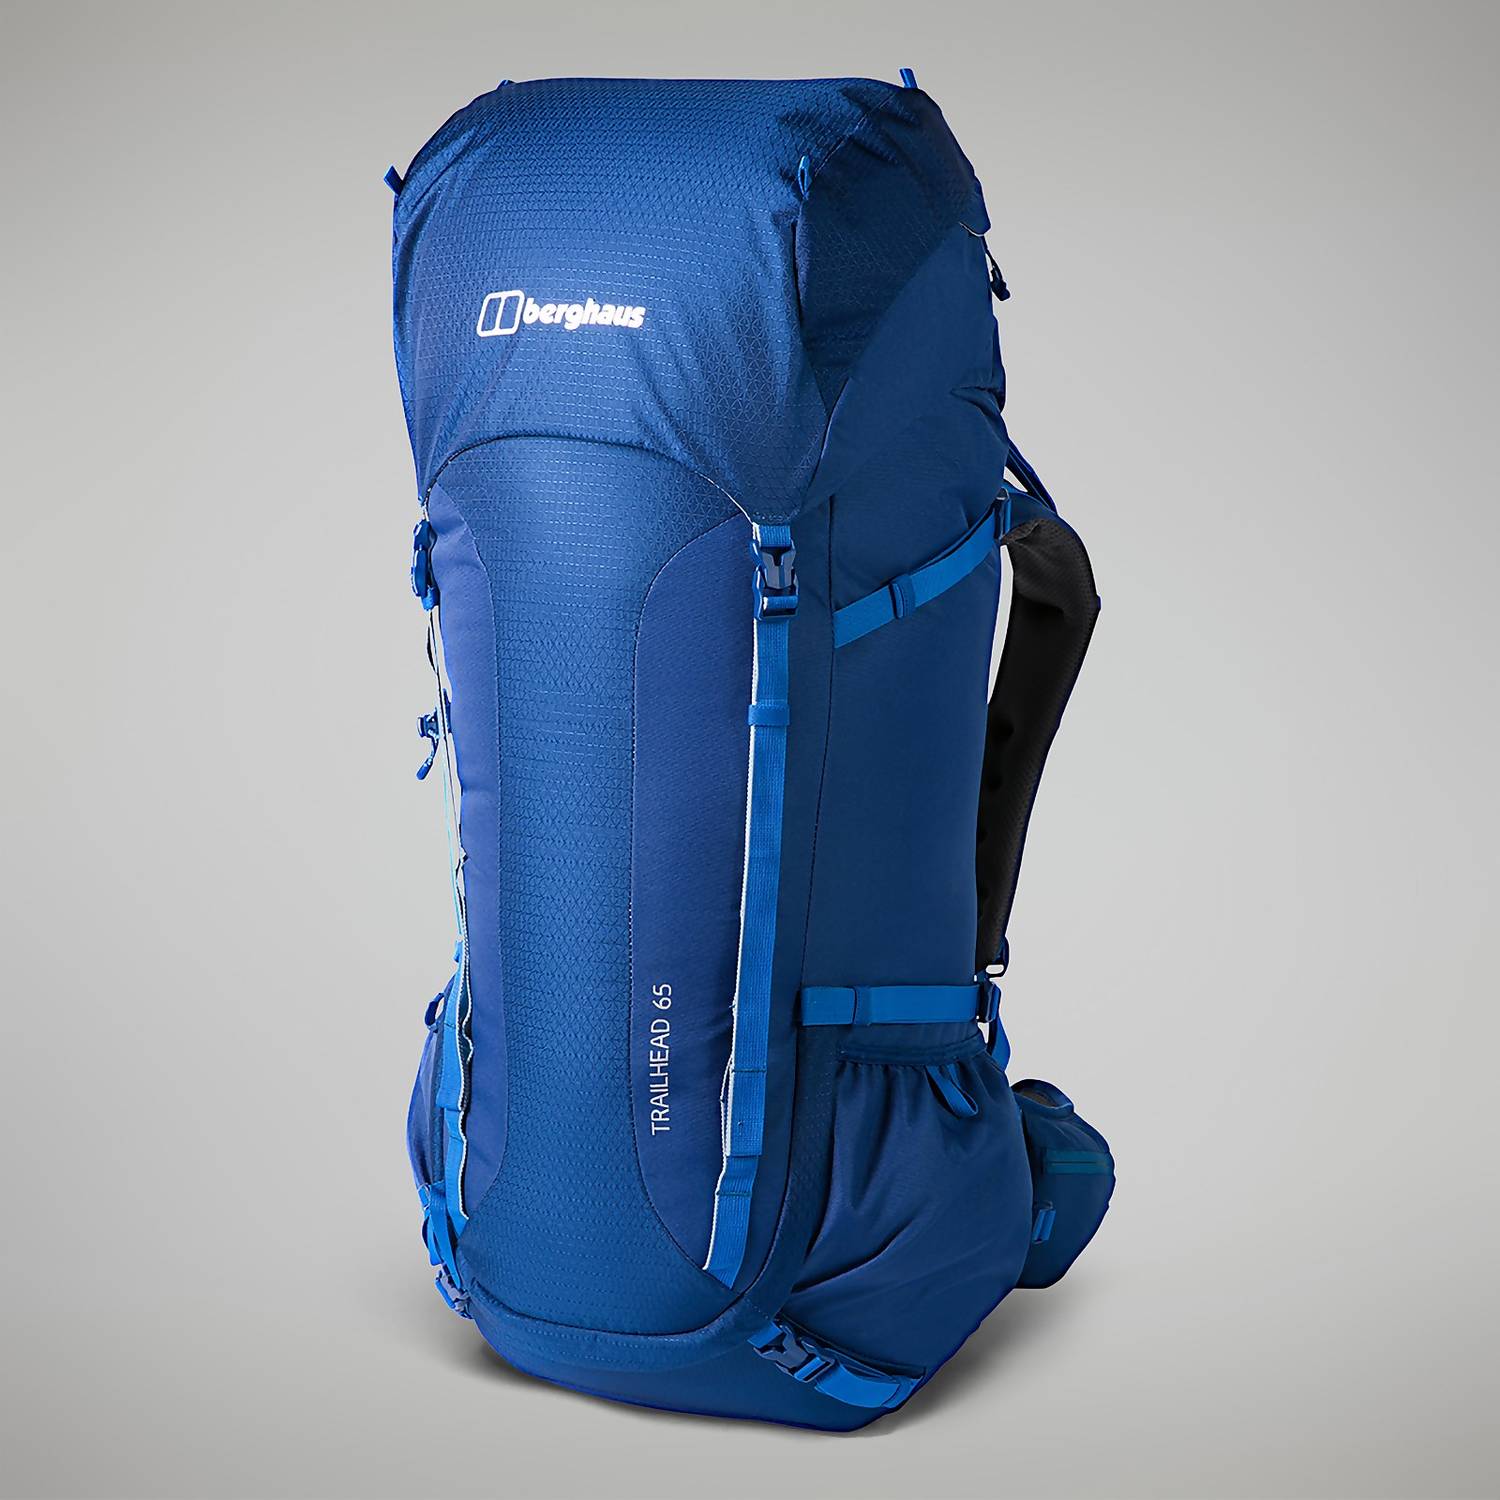 Berghaus Rucksack - Unisex Trailhead 65 - Blue Brimming with space, pockets and the durability to keep your gear in tip top condition.